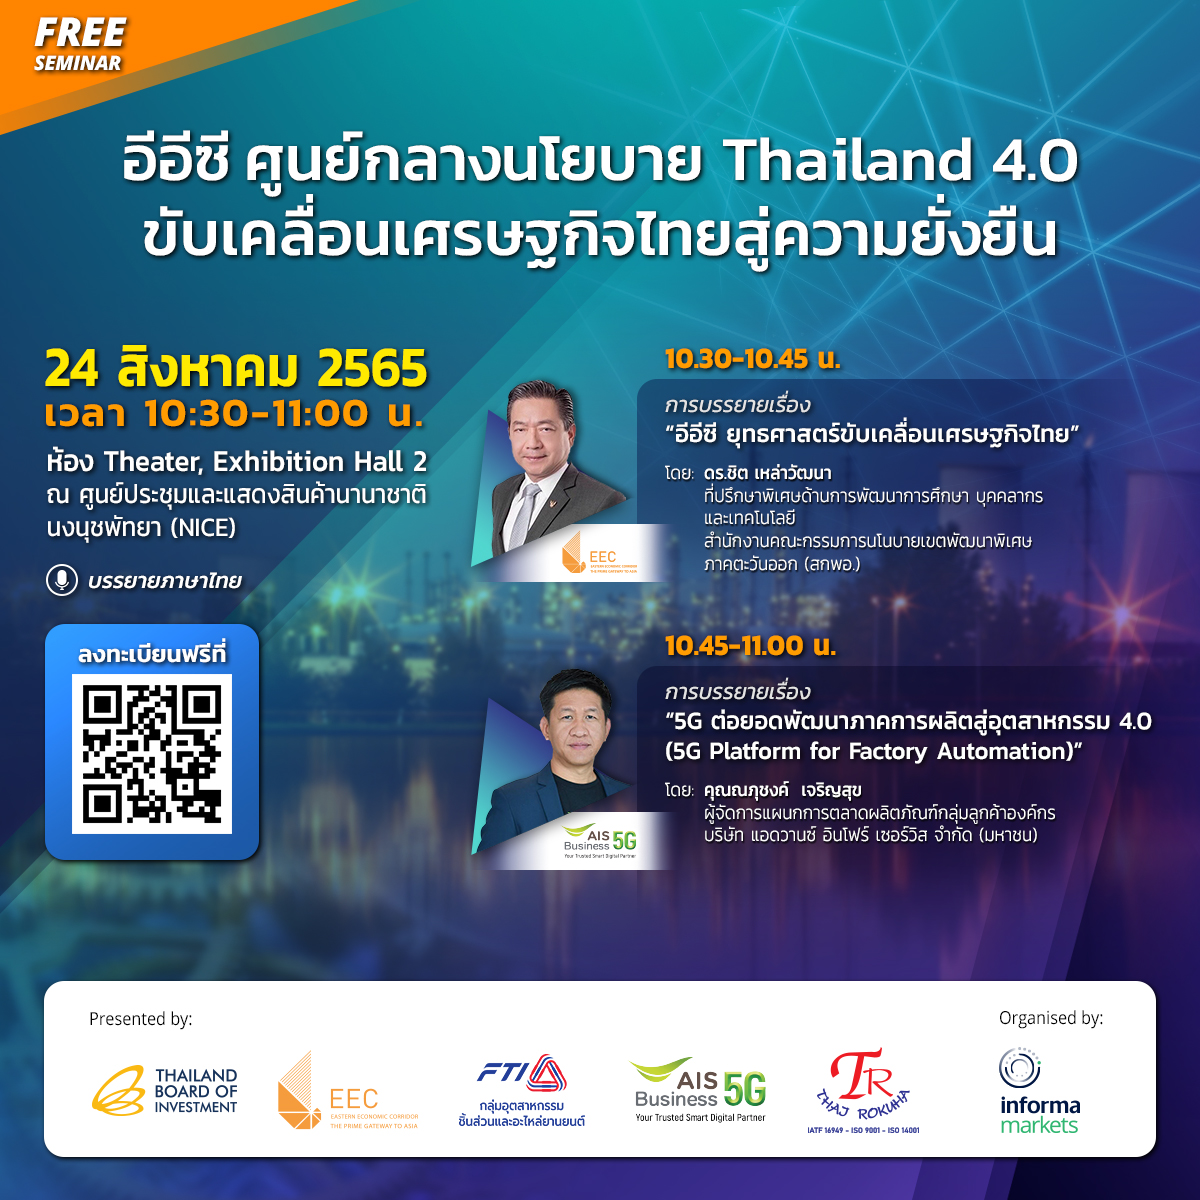 EEC CENTER OF THAILAND 4.0 AND DRIVING THE THAI ECONOMY TOWARDS SUSTAINABILITY